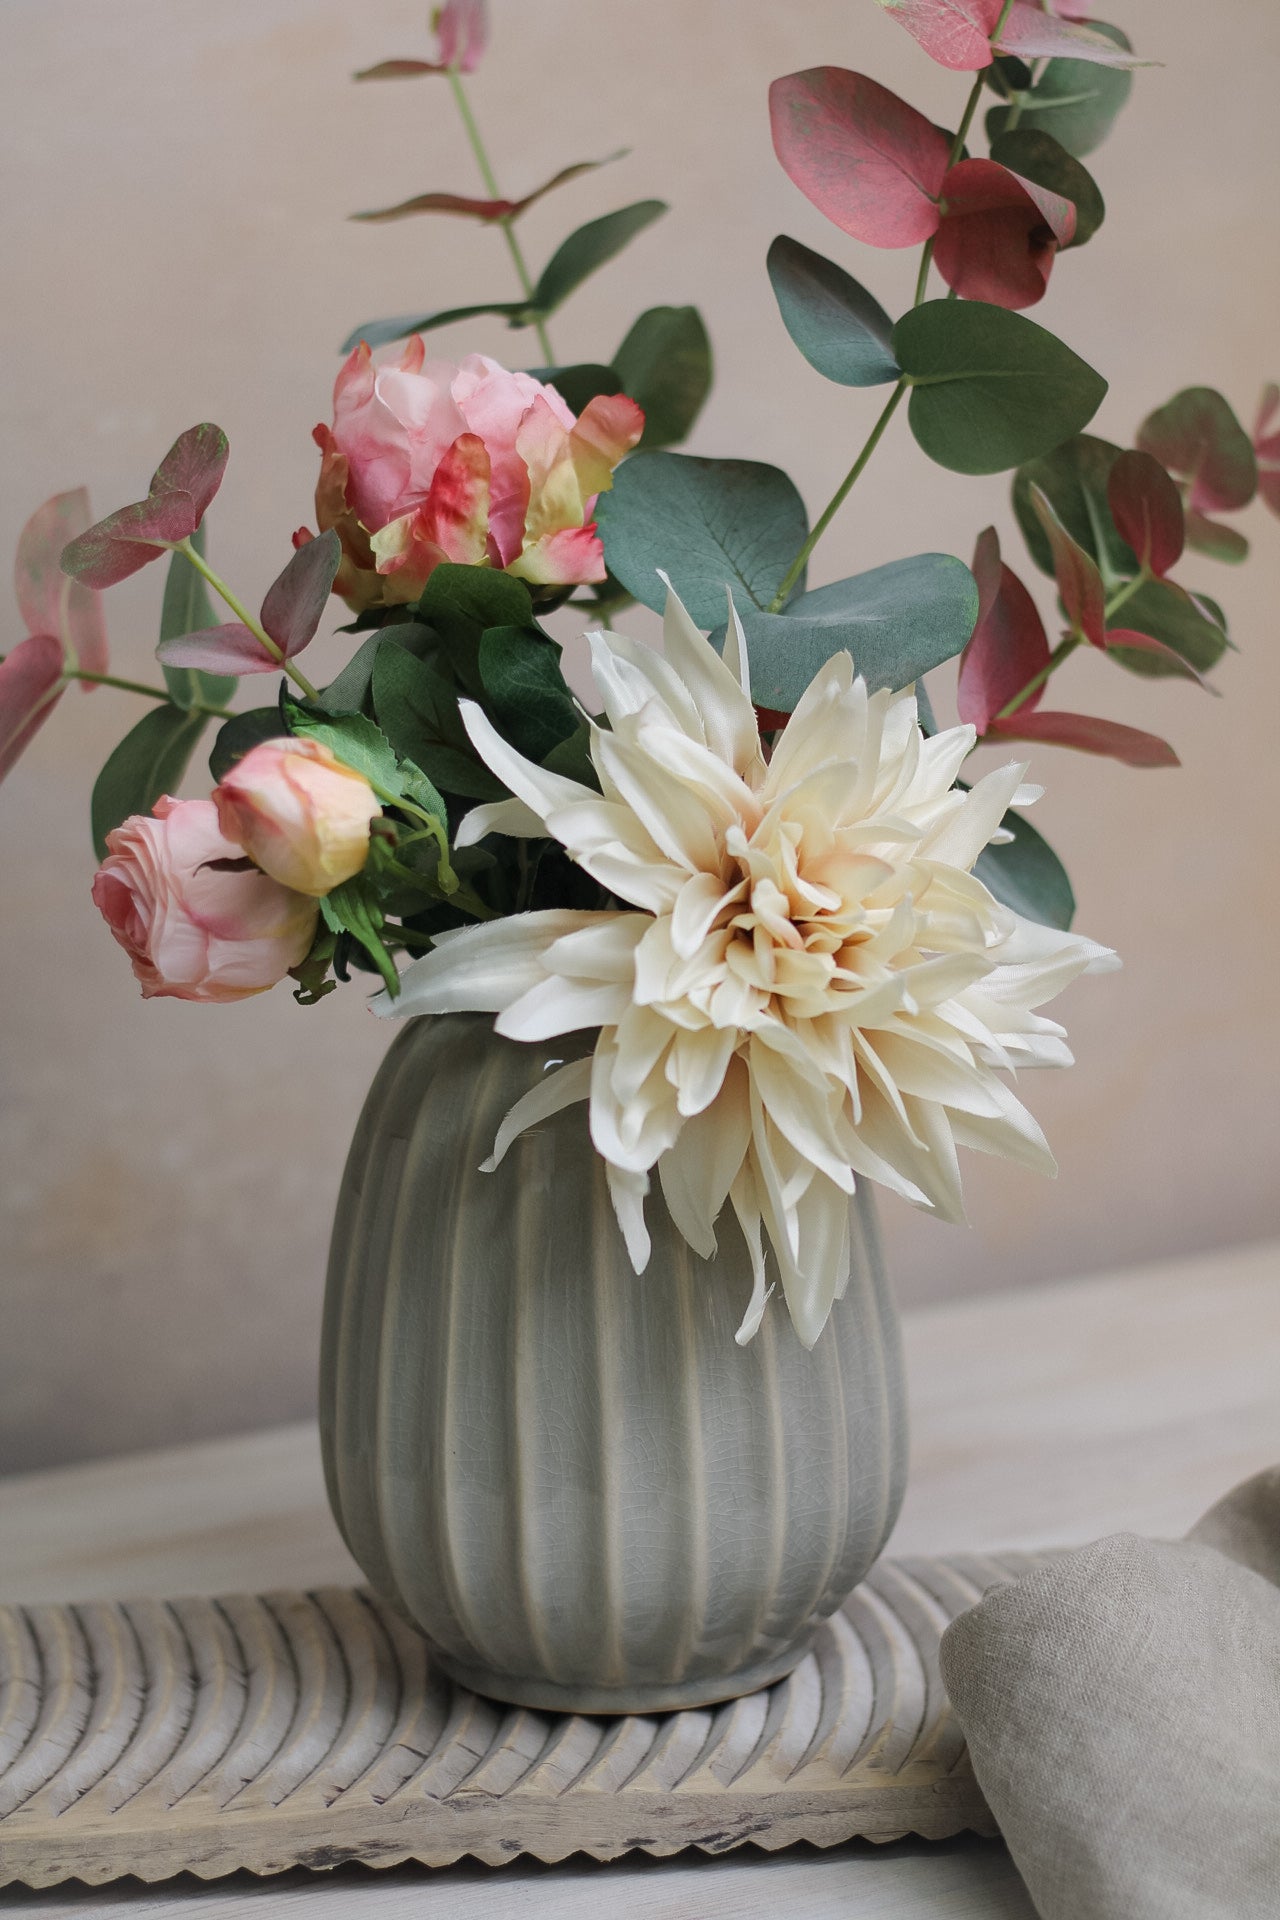 A Step-by-Step Guide to Arranging Faux Floral Arrangements in Your Home